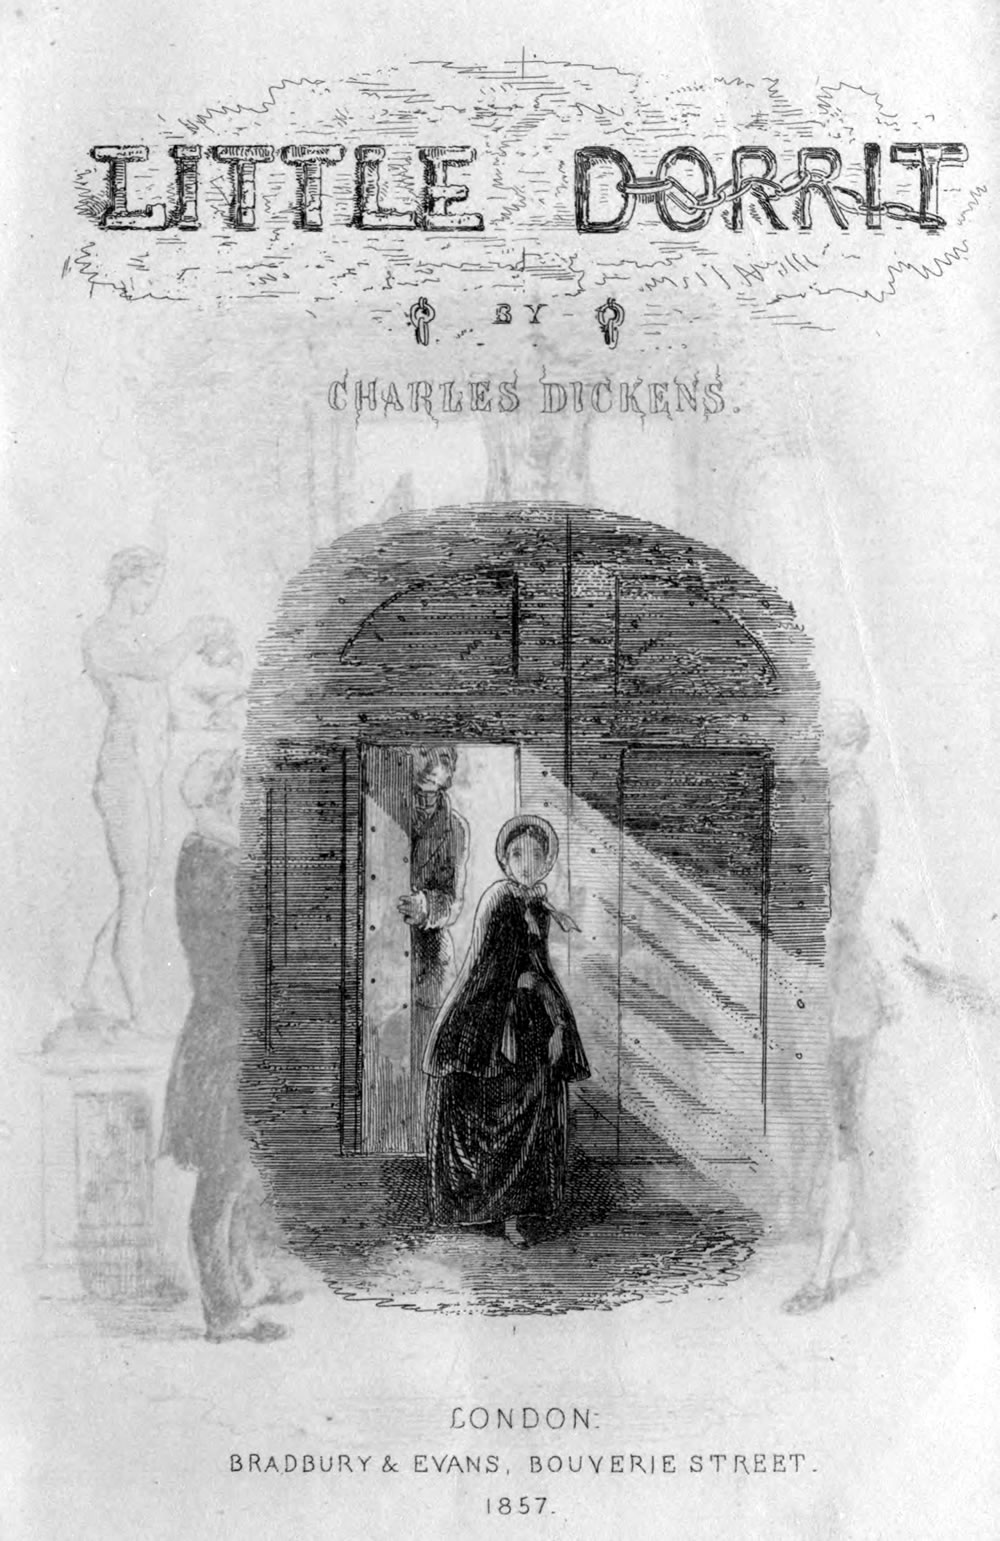 The original title page of Charles Dickens's Little Dorrit shows Amy leaving the Marshalsea.